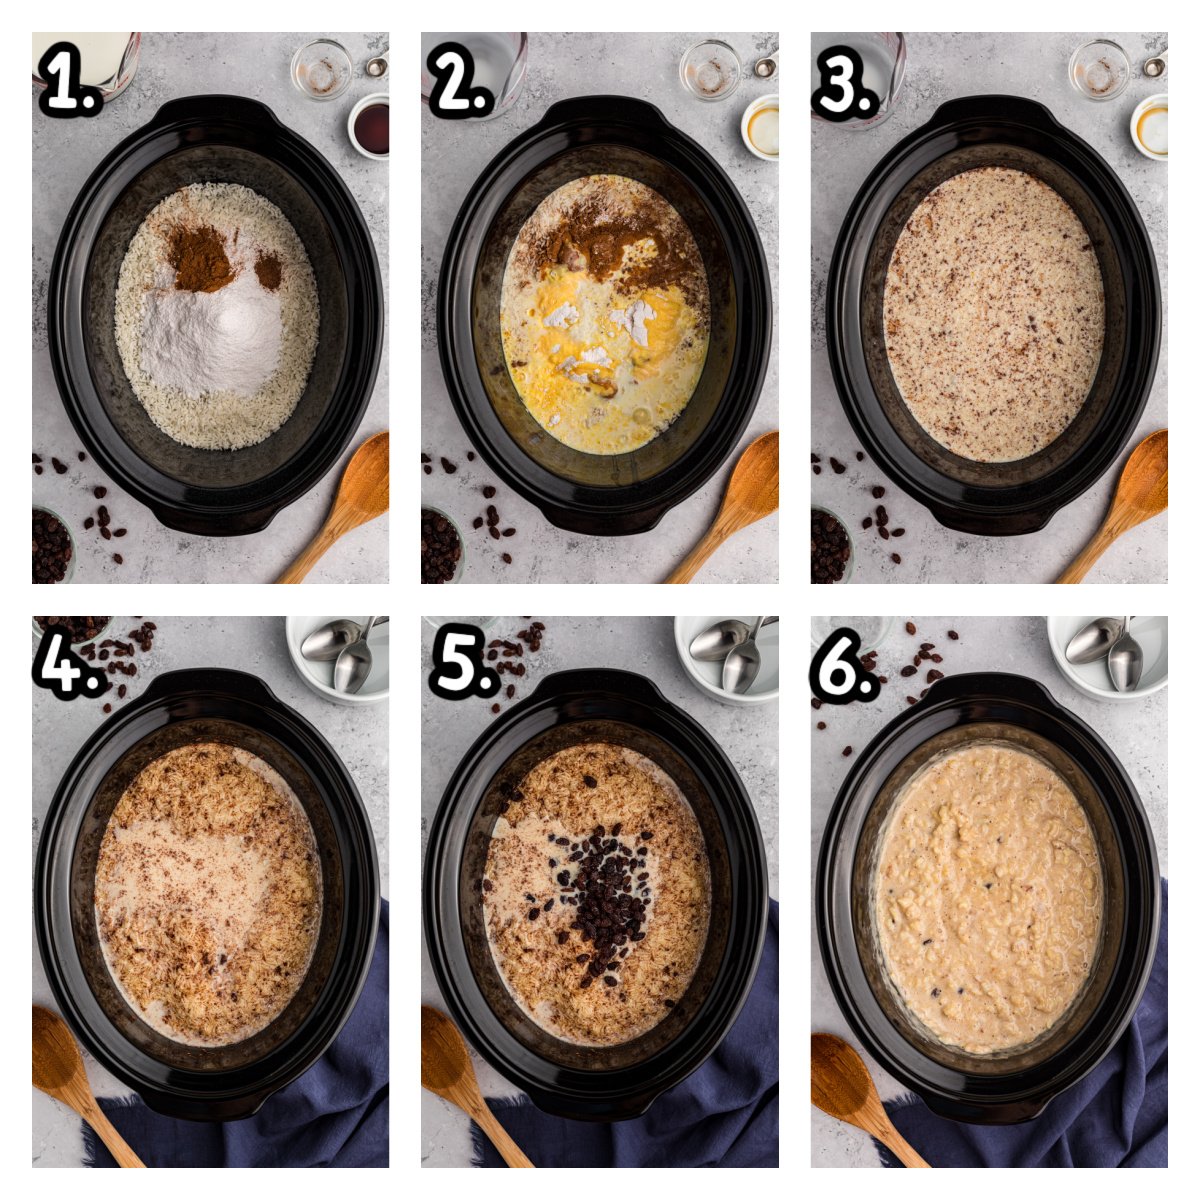 Six images showing how to make rice pudding in a crockpot.